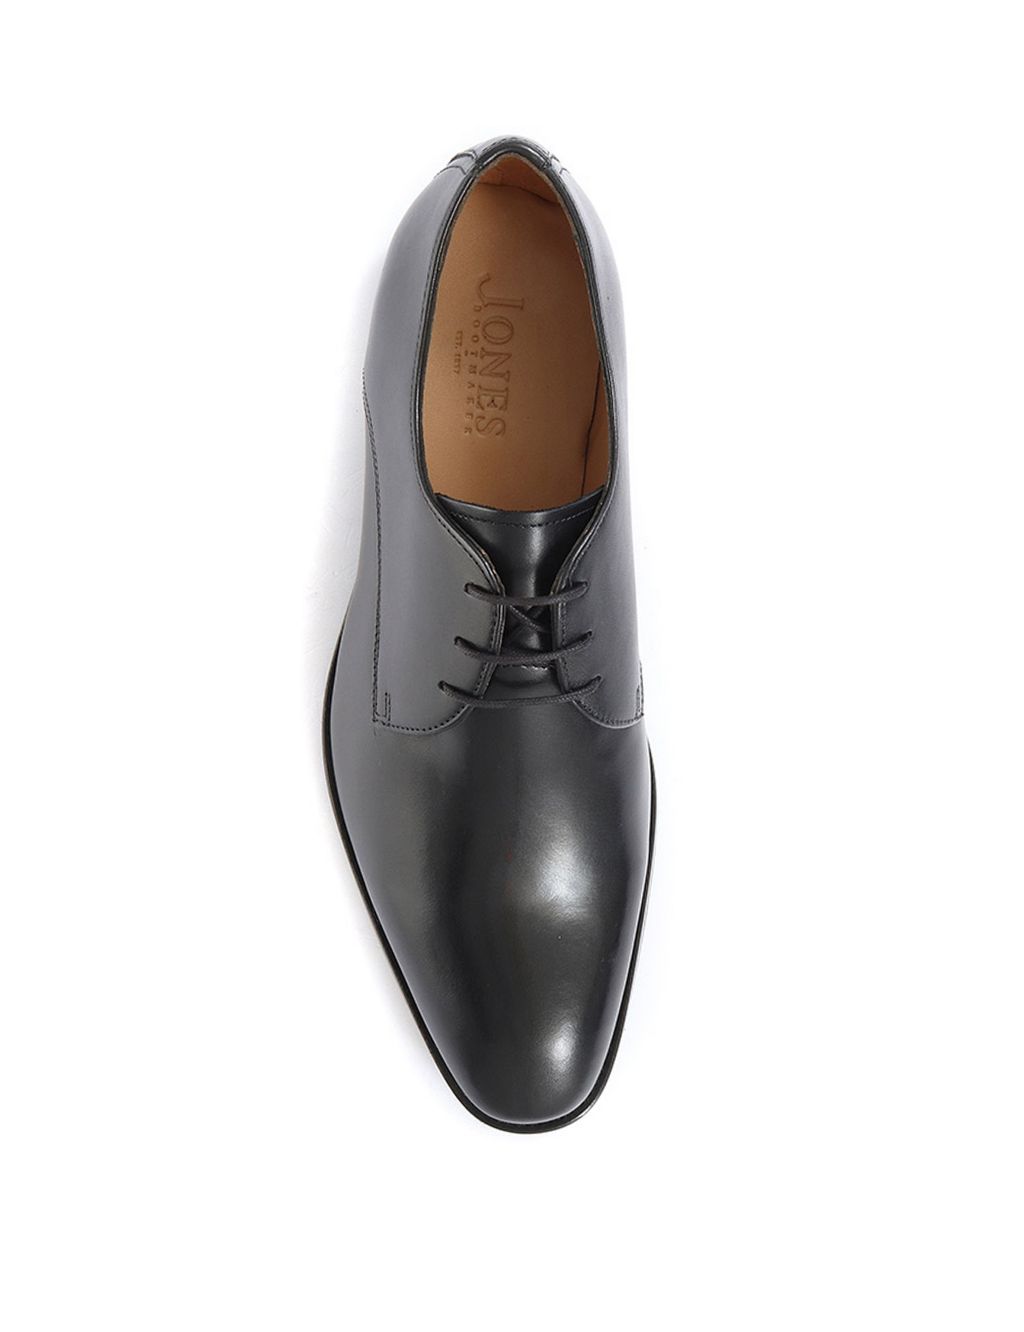 Leather Derby Shoe image 6